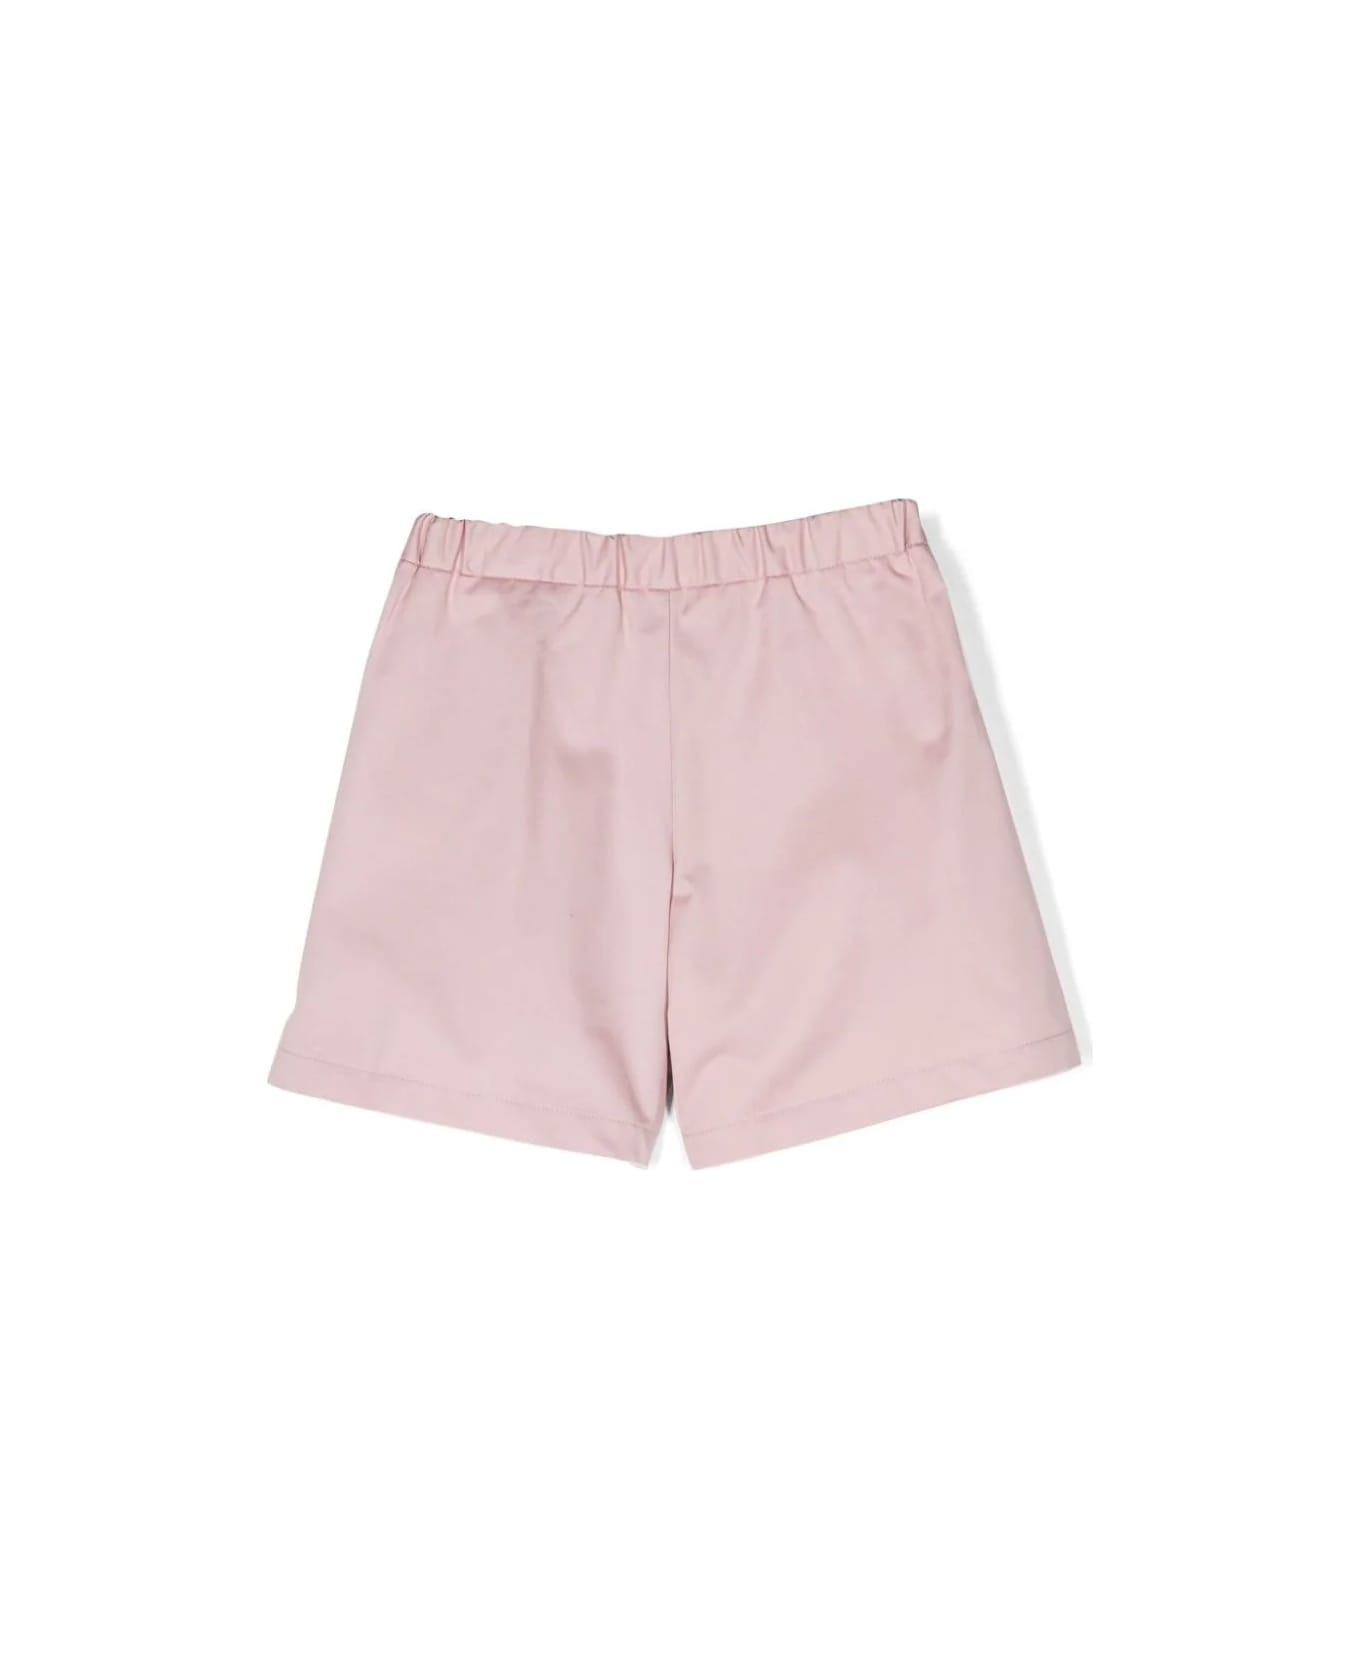 Bonpoint Faded Pink Courtney Shorts - Pink